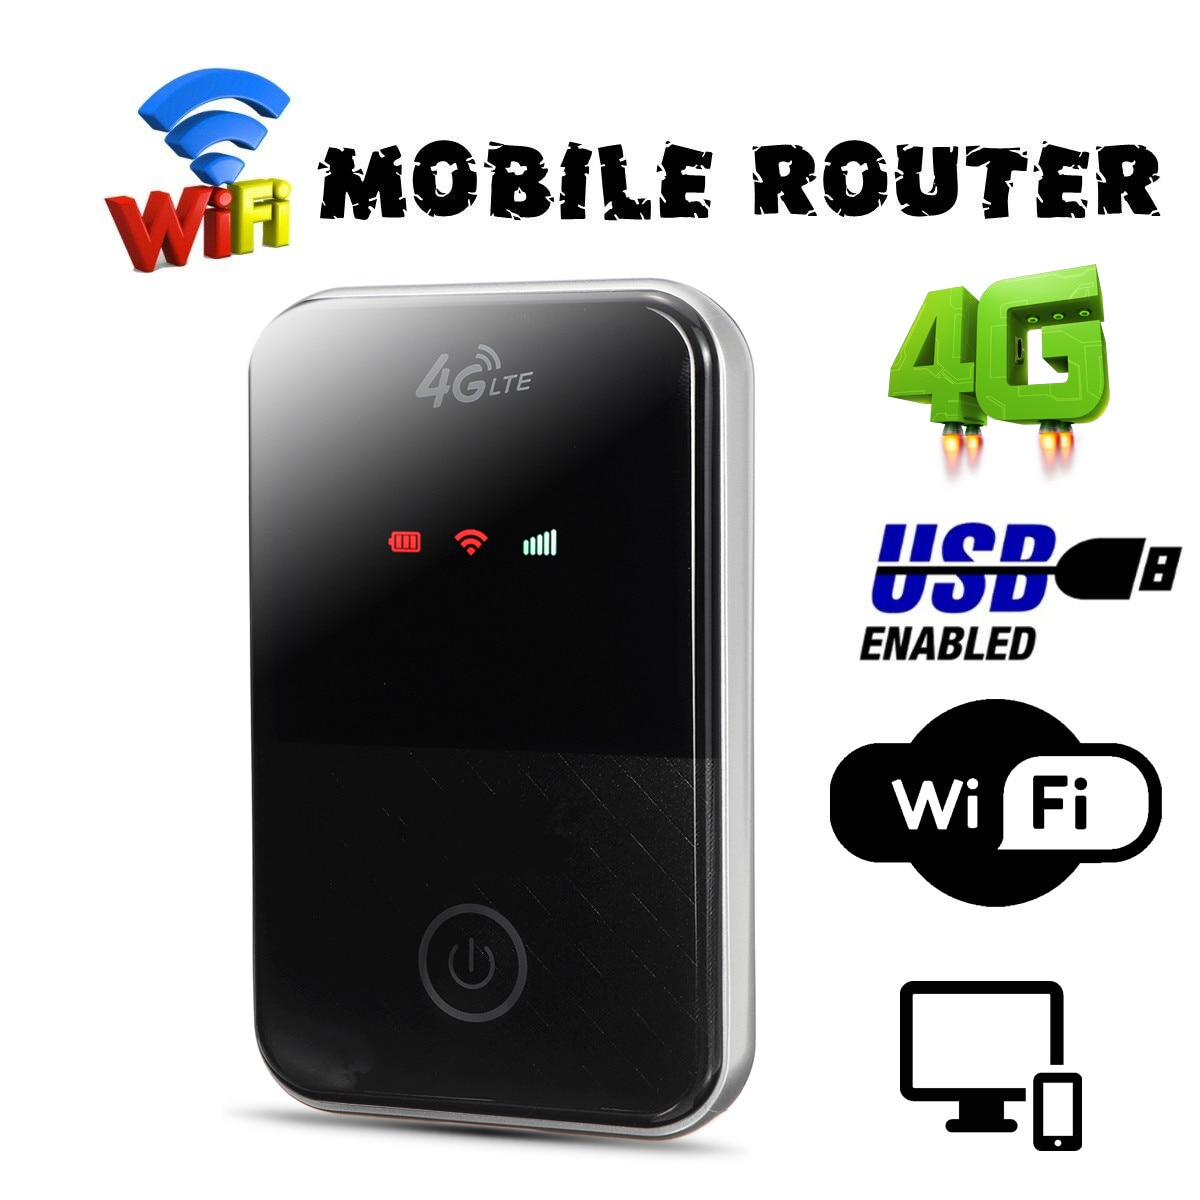 Portable 4G LTE Wifi Router Wireless Pocket Router Wifi FDD B1 B3 B7 B8 B20 WCDMA B1 B5 B8 Standard Sim Card 150mbps